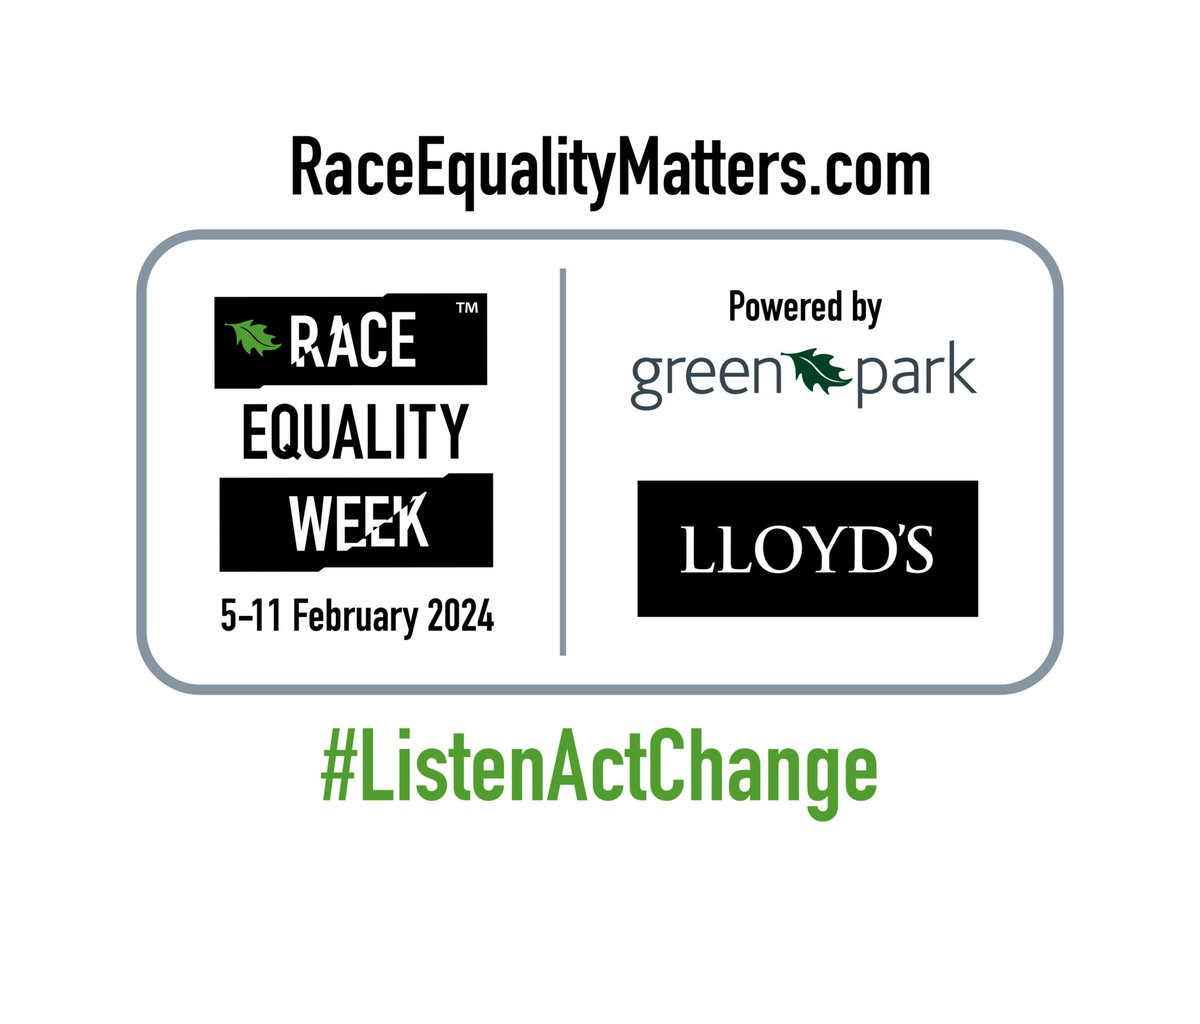 The official #RaceEqualityWeek may be coming to an end , but we hope that appreciation continues to be shown, whether there is an official awareness week or not. For a reminder on the importance of #RaceEquality read here: zurl.co/tvFG